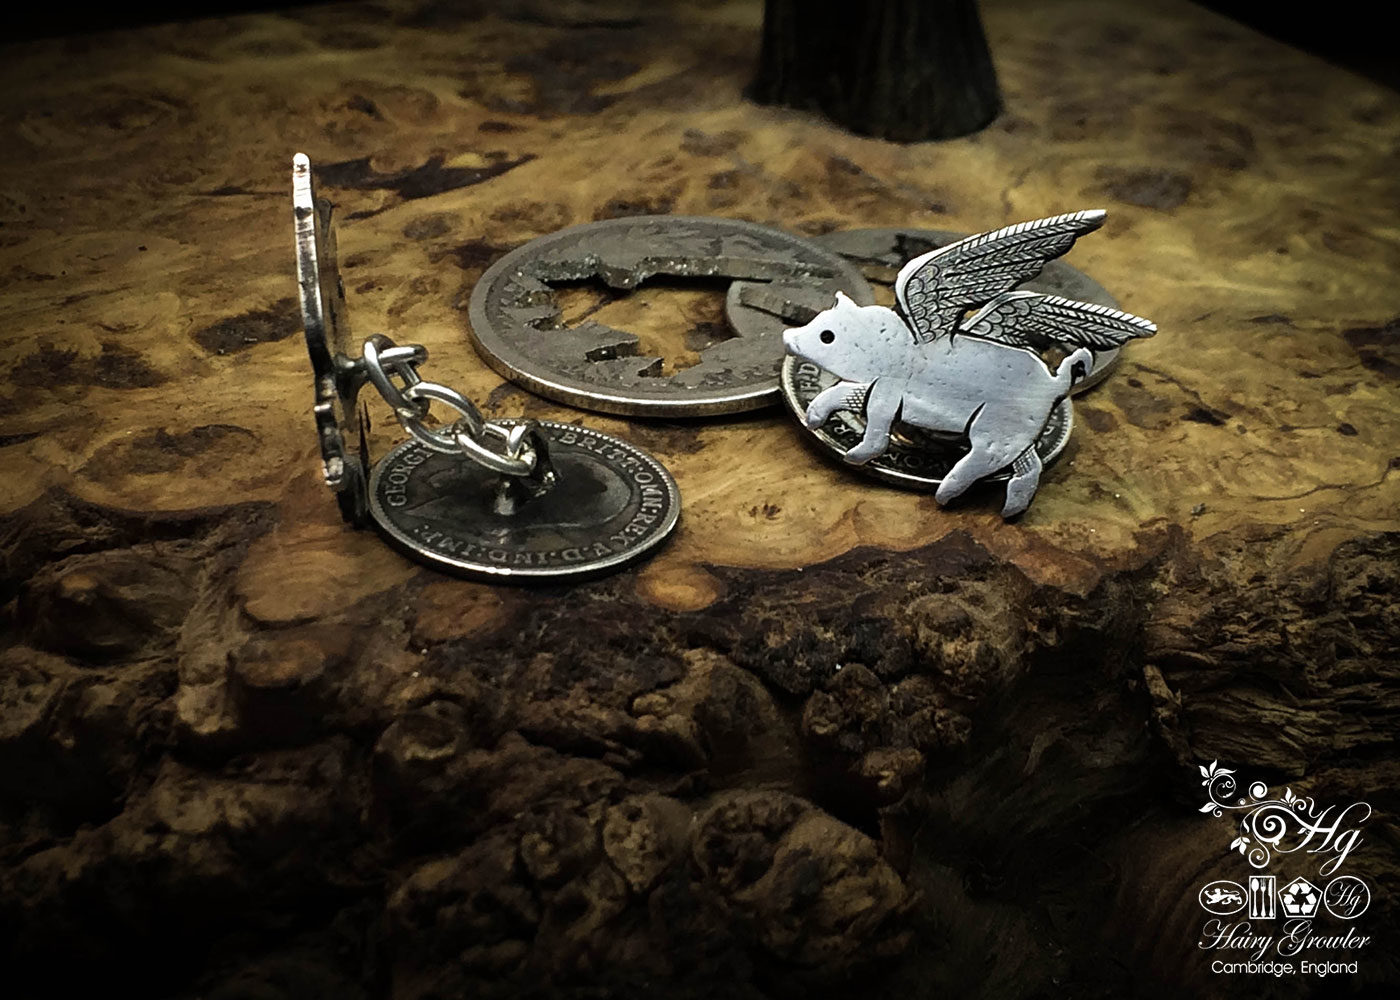 Flying pig cufflinks handcrafted and recycled from sterling silver shillings and threepence coins